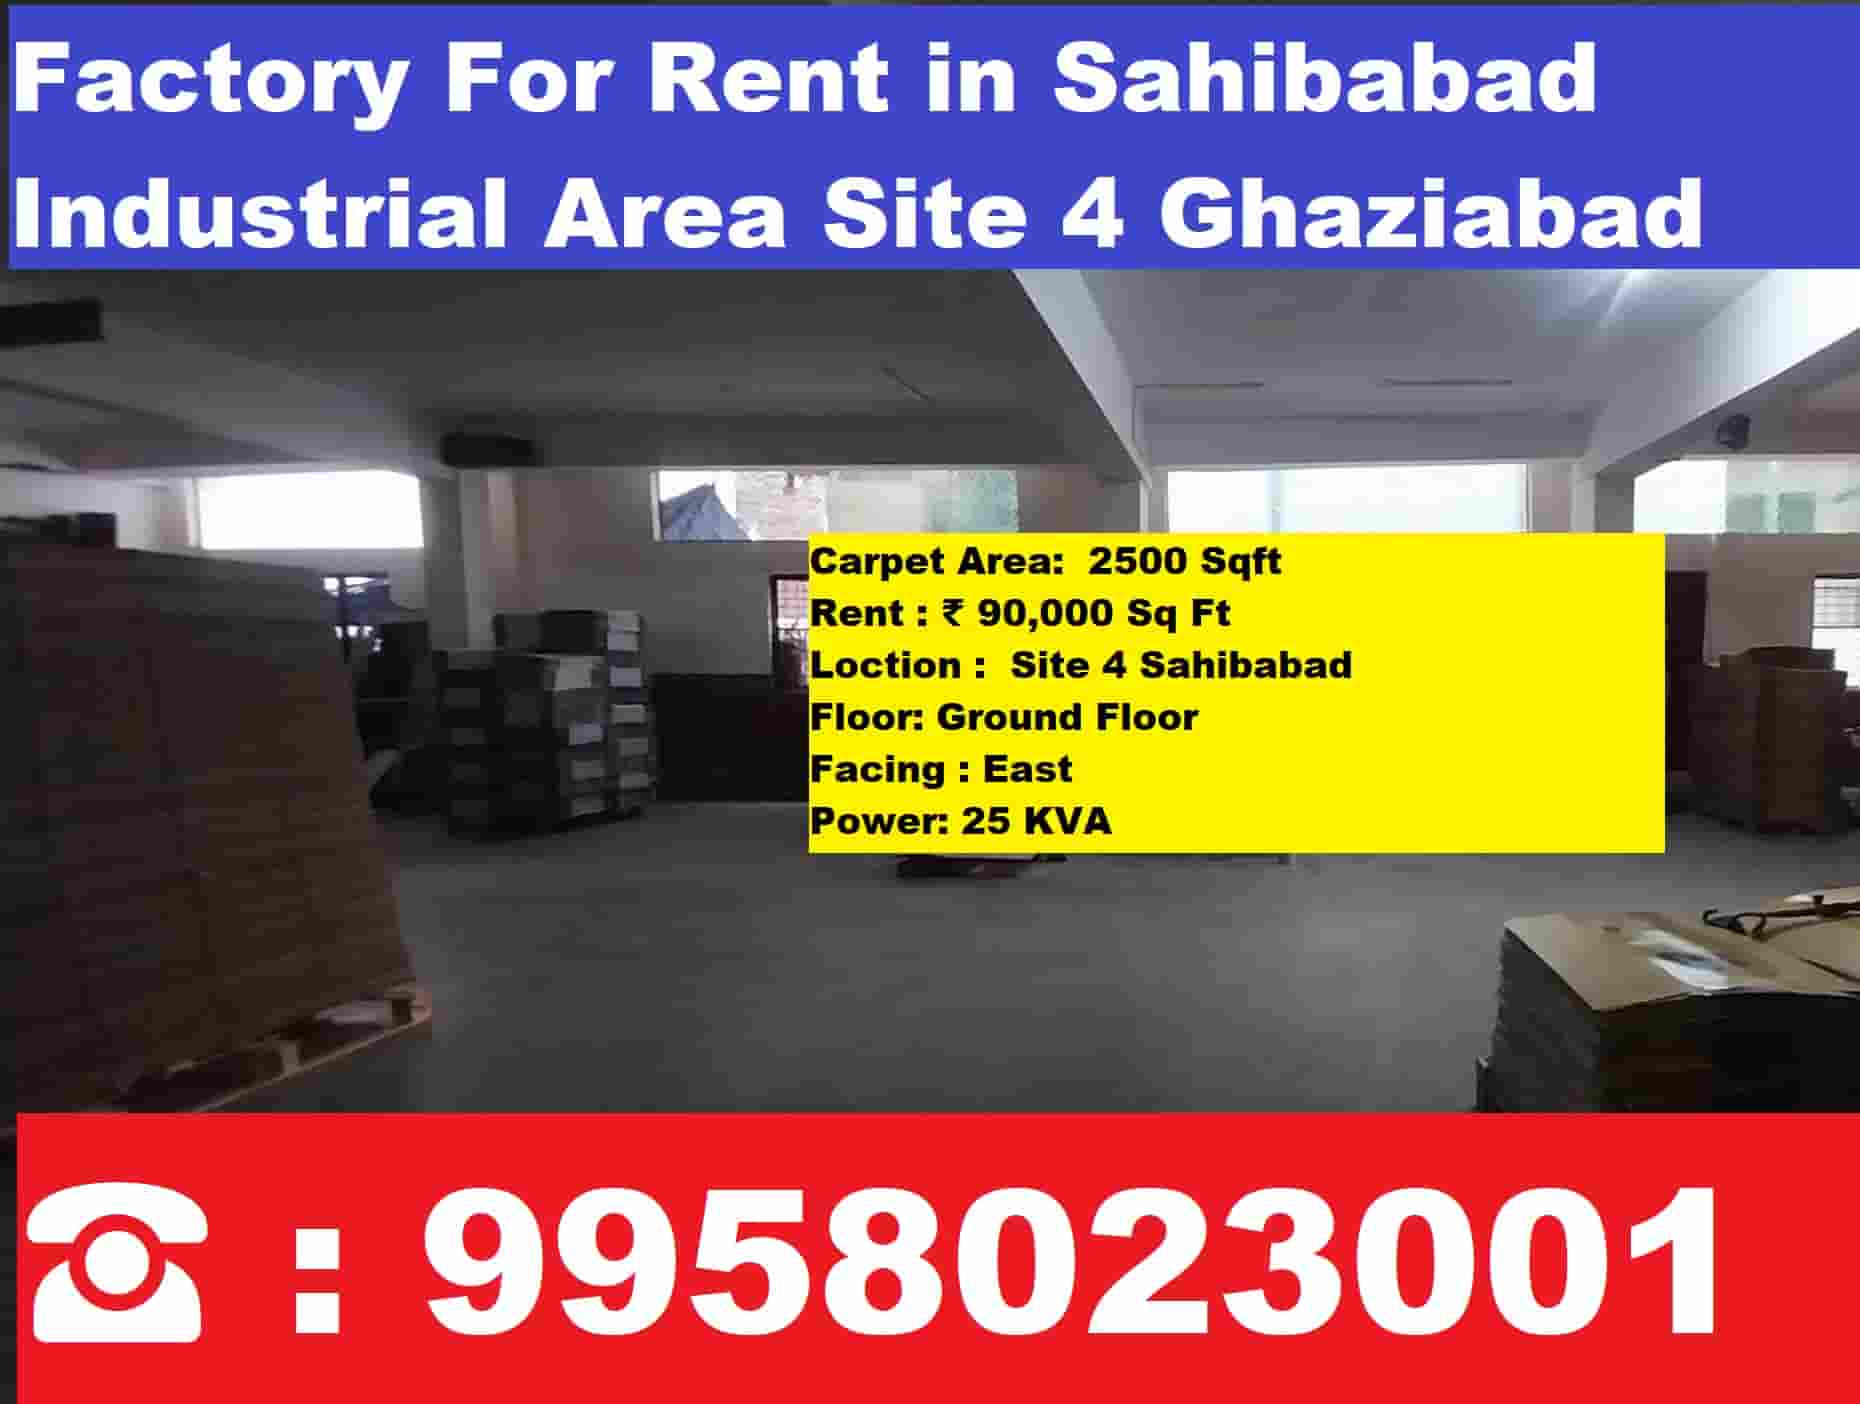 Factory for Rent in Sahibabad Industrial Area Site